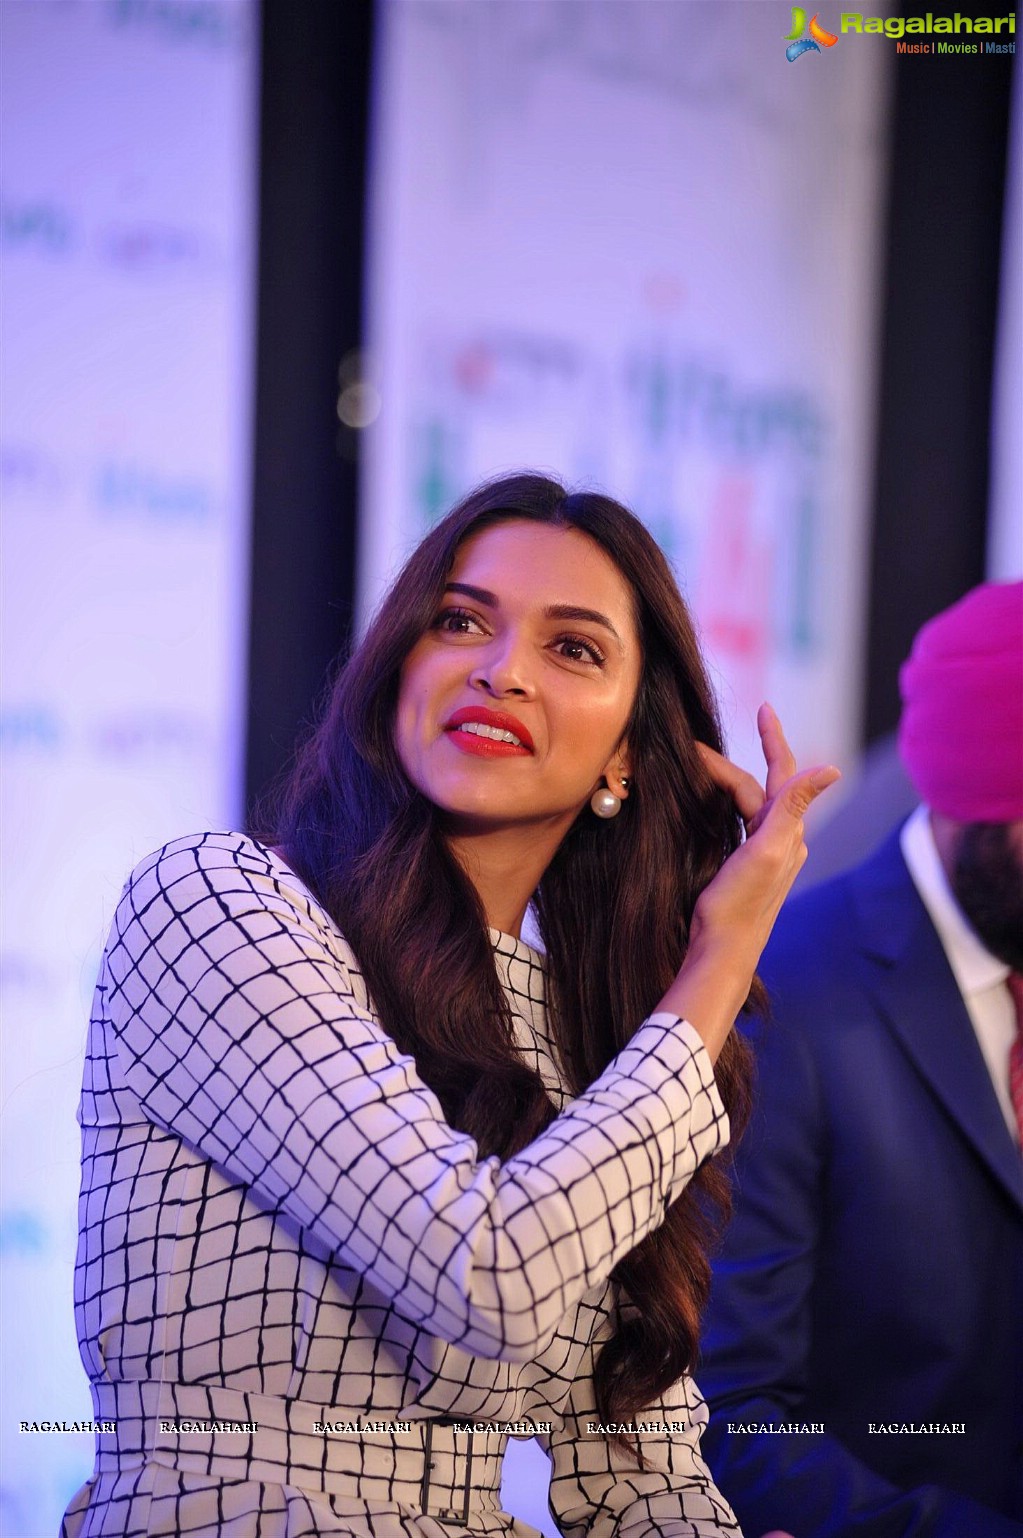 Deepika Padukone Launches NDTV and Fortis Healthcare 4U Campaign